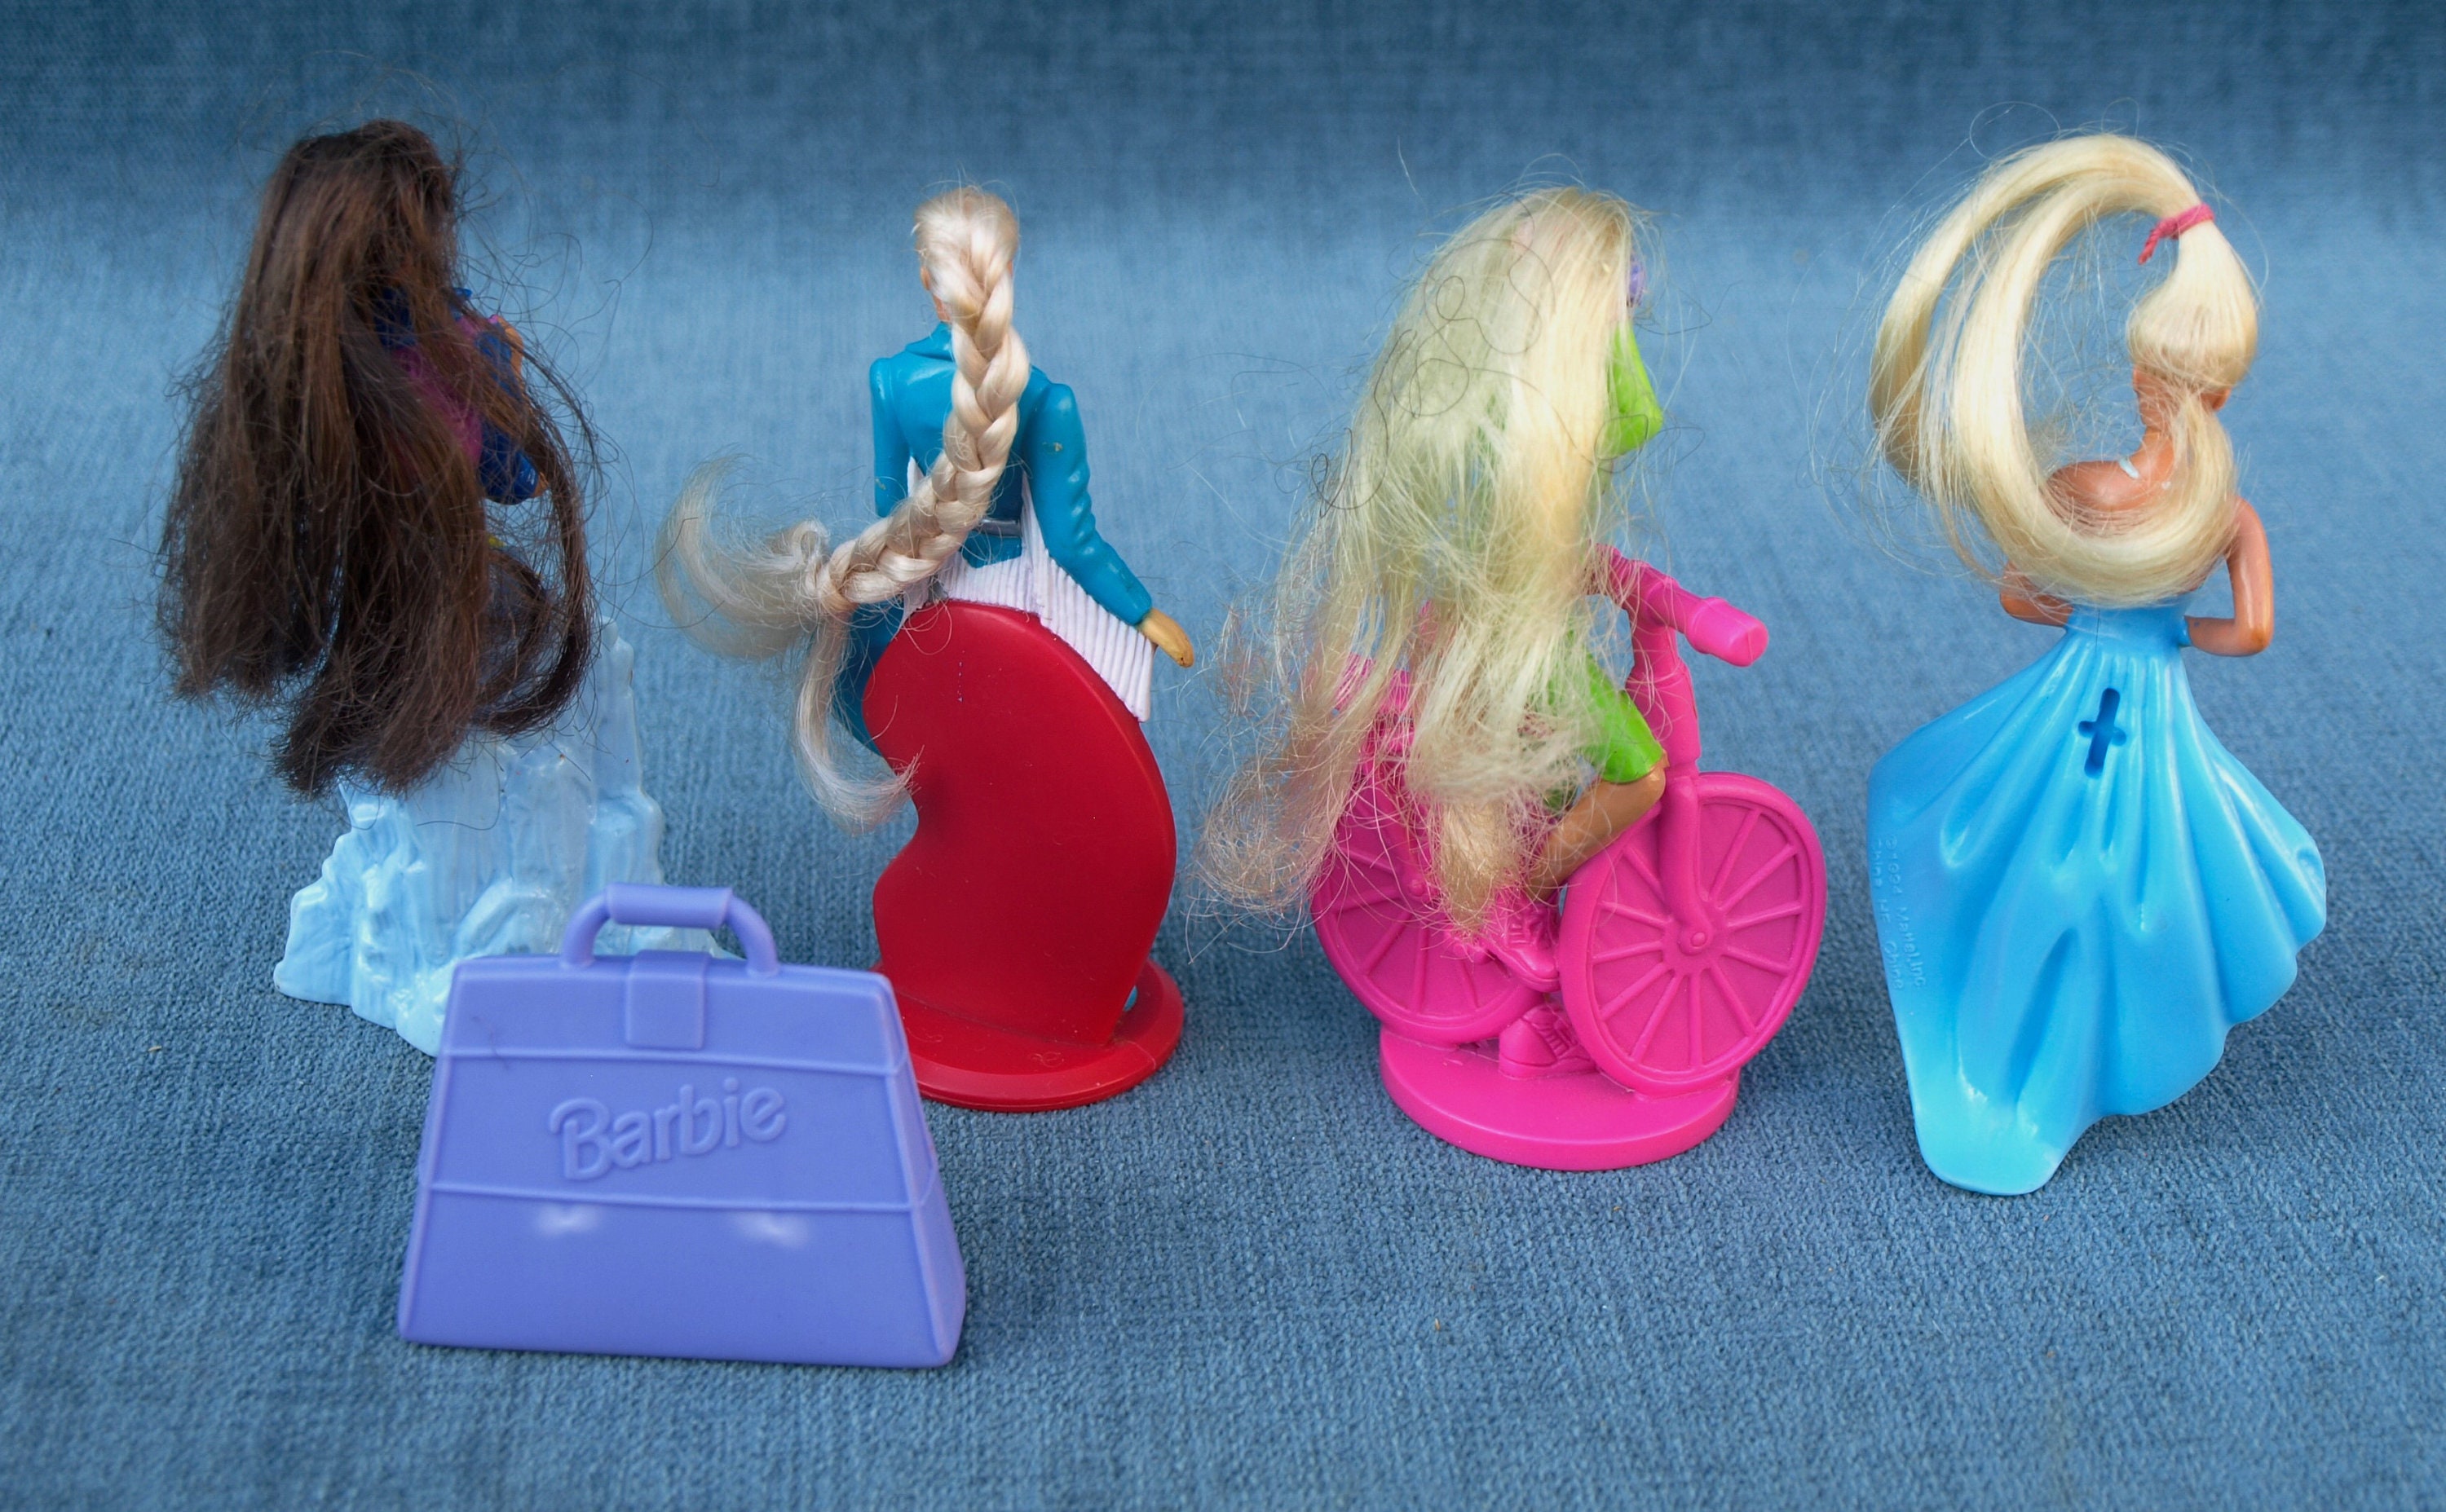 Small Rubber Barbie Dolls McDonald's Happy Meal Toys set of 4